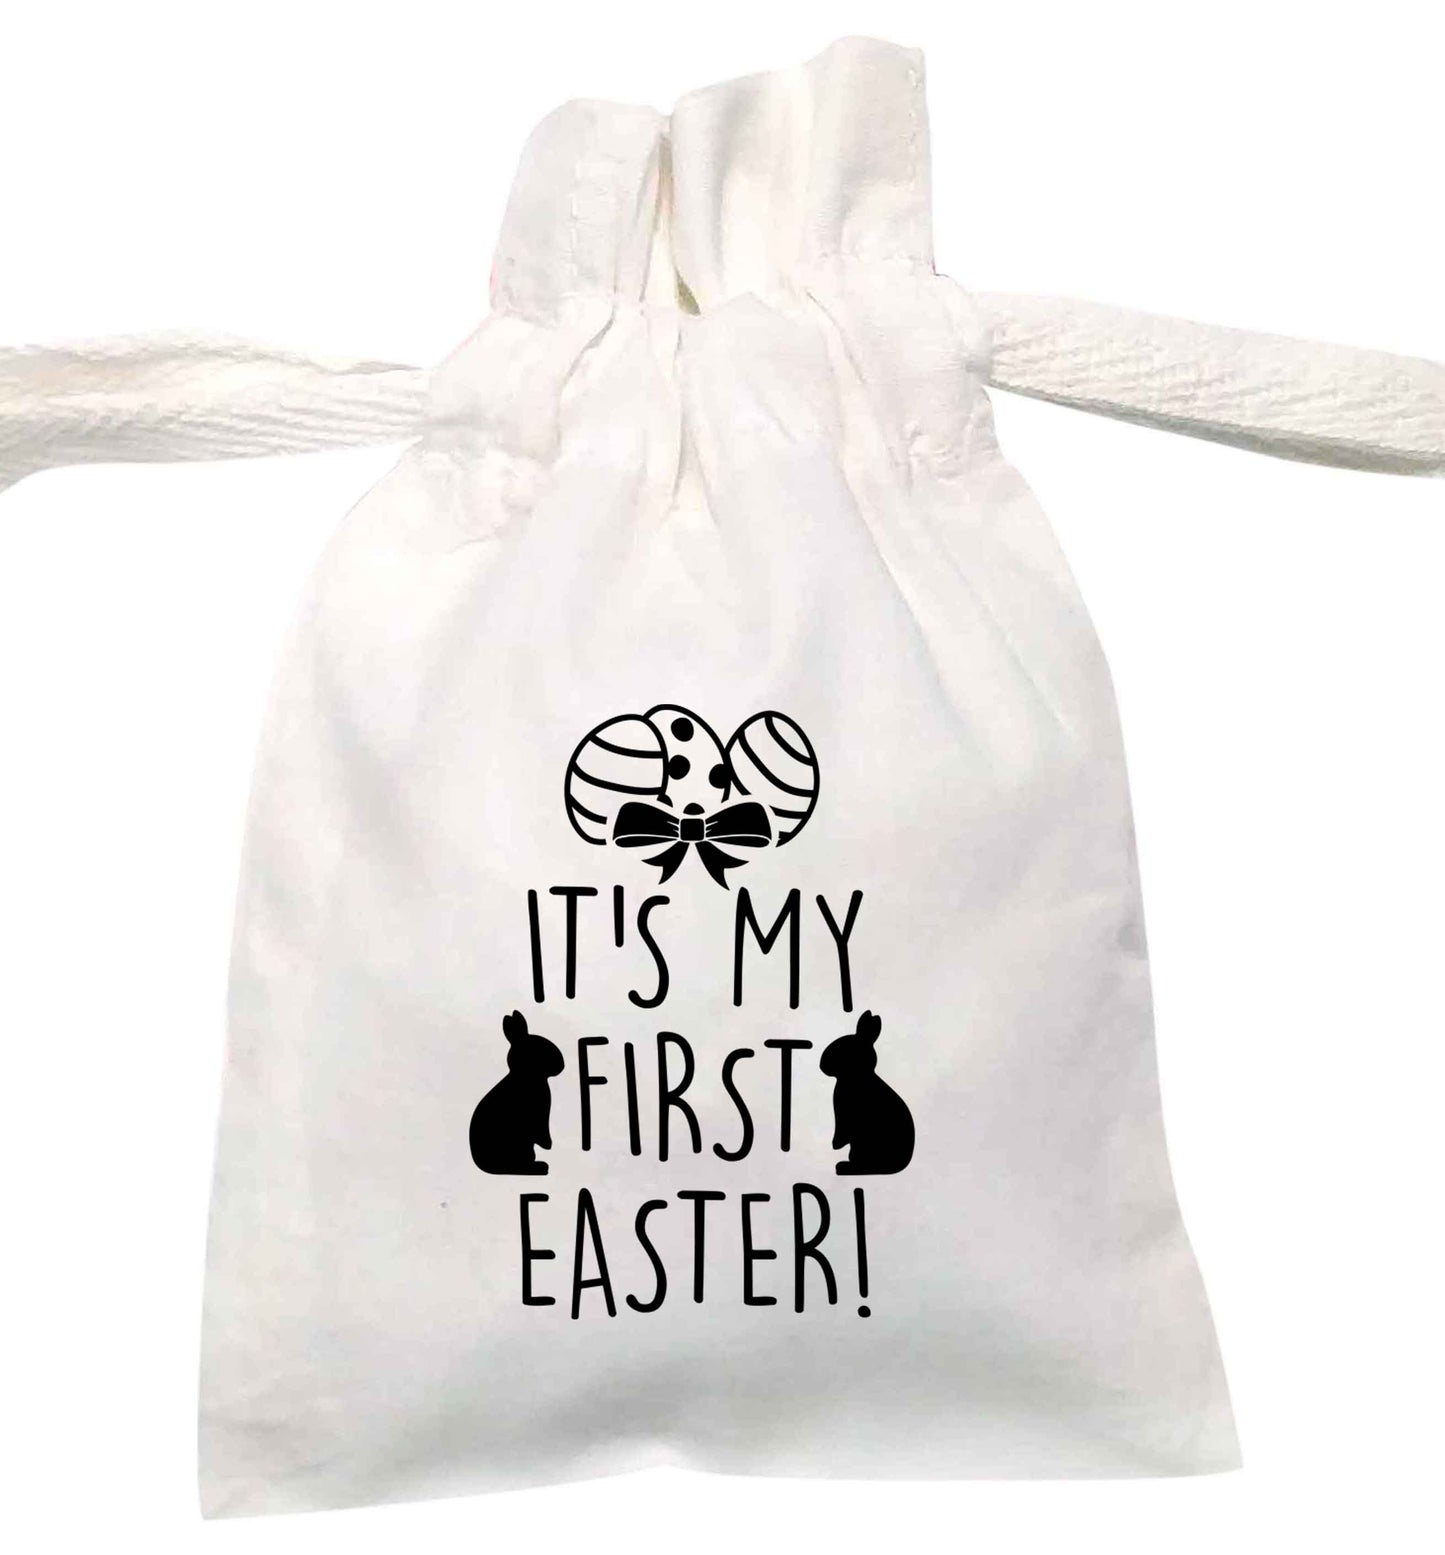 It's my first Easter | XS - L | Pouch / Drawstring bag / Sack | Organic Cotton | Bulk discounts available!